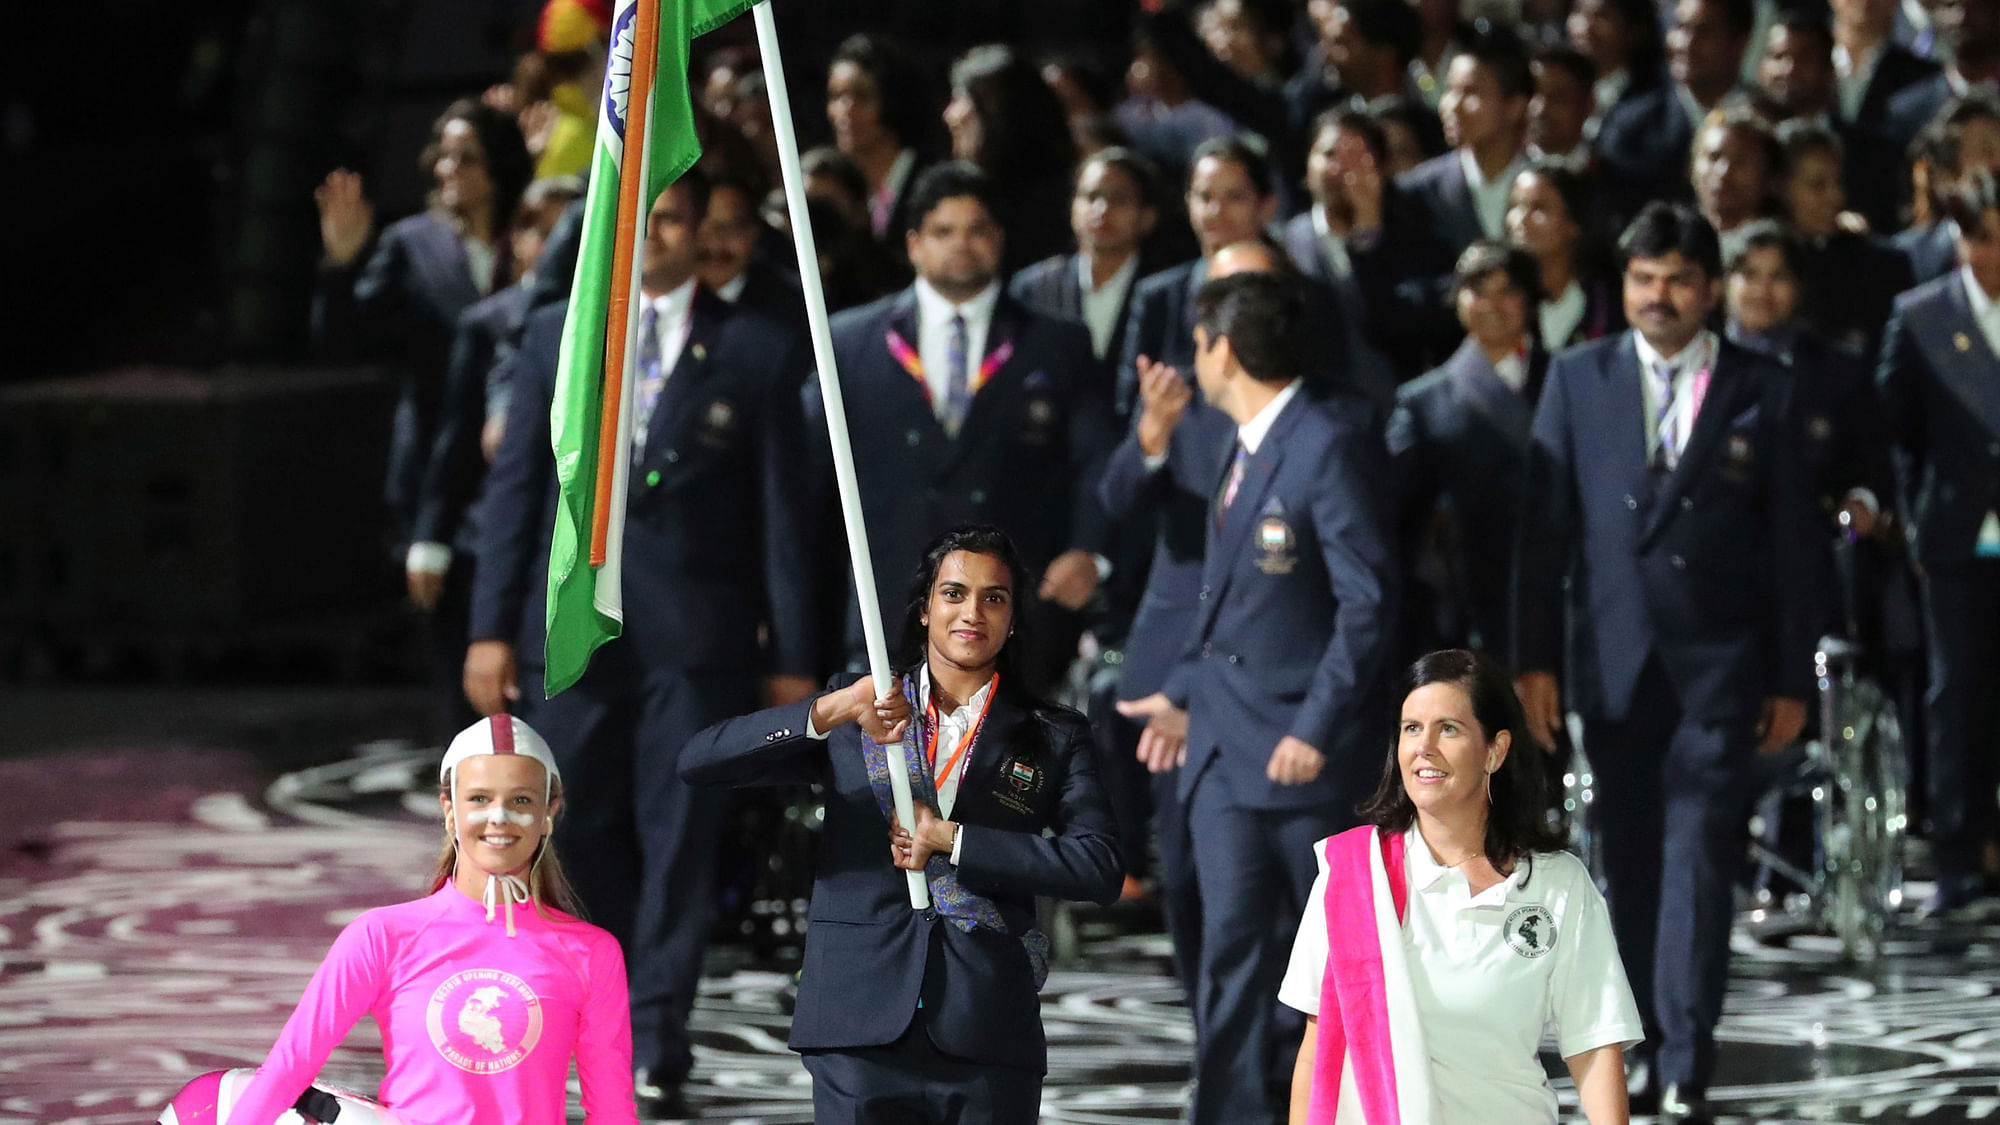 PV Sindhu led the Indian contingent at the opening ceremony of the 21st Commonwealth Games.